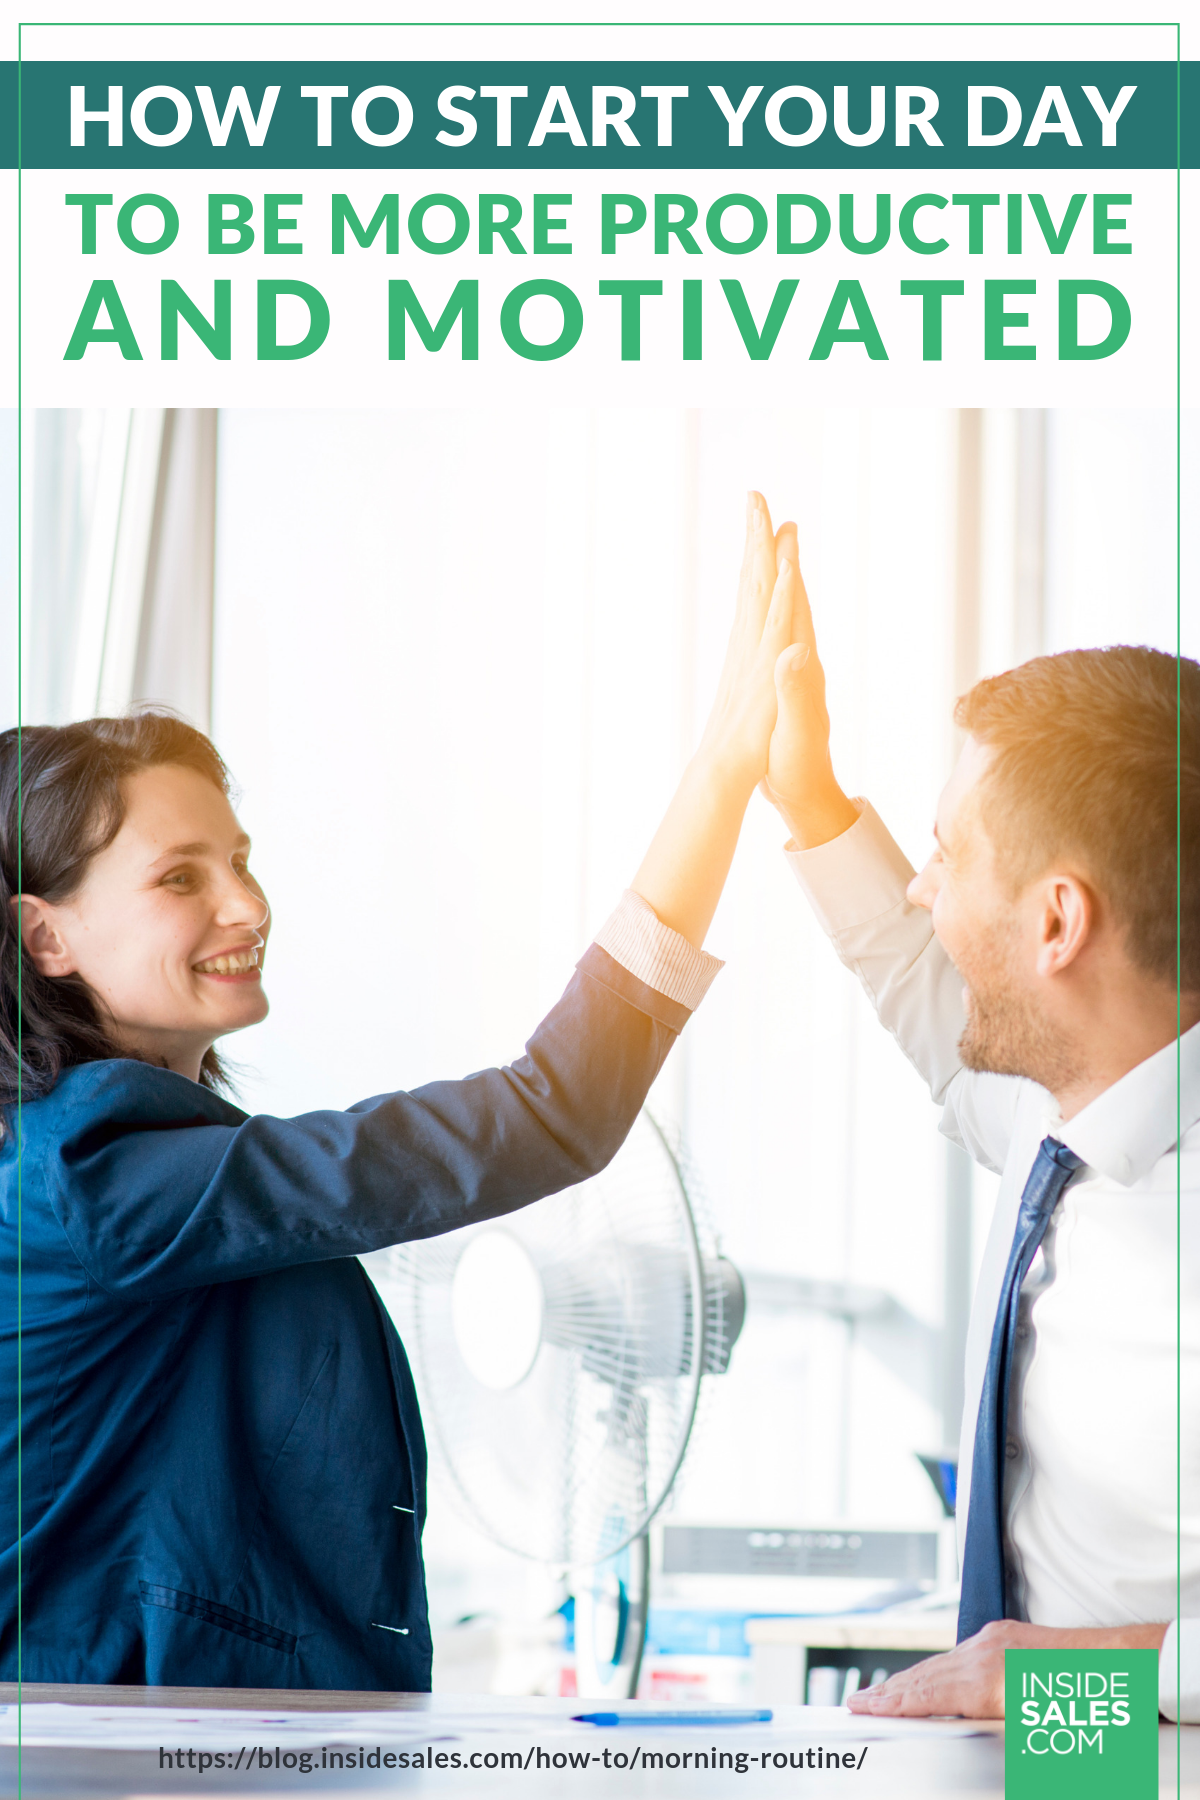 How To Start Your Day To Be More Productive And Motivated [INFOGRAPHIC] https://www.insidesales.com/blog/how-to/morning-routine/